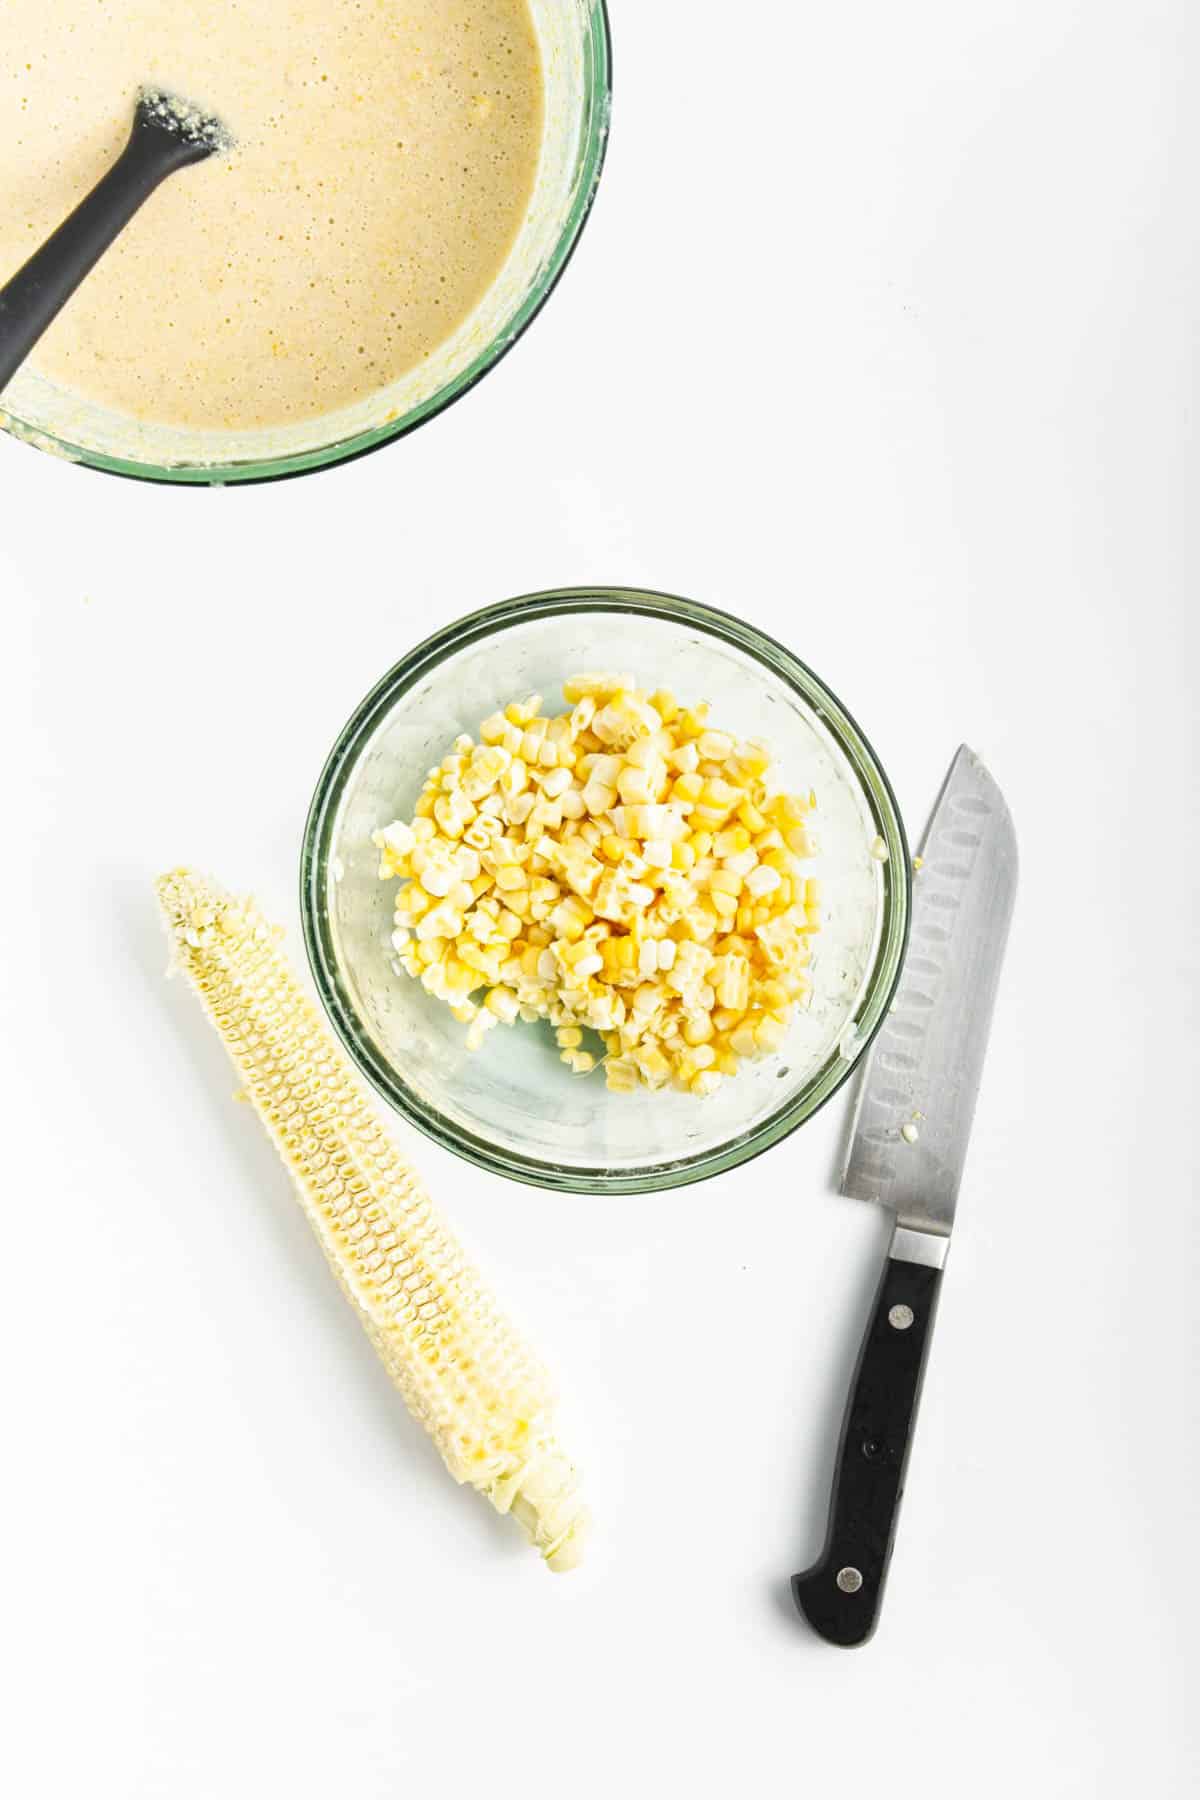 Cornbread batter in a glass bowl and a small glass bowl with corn kernels and empty cobs.